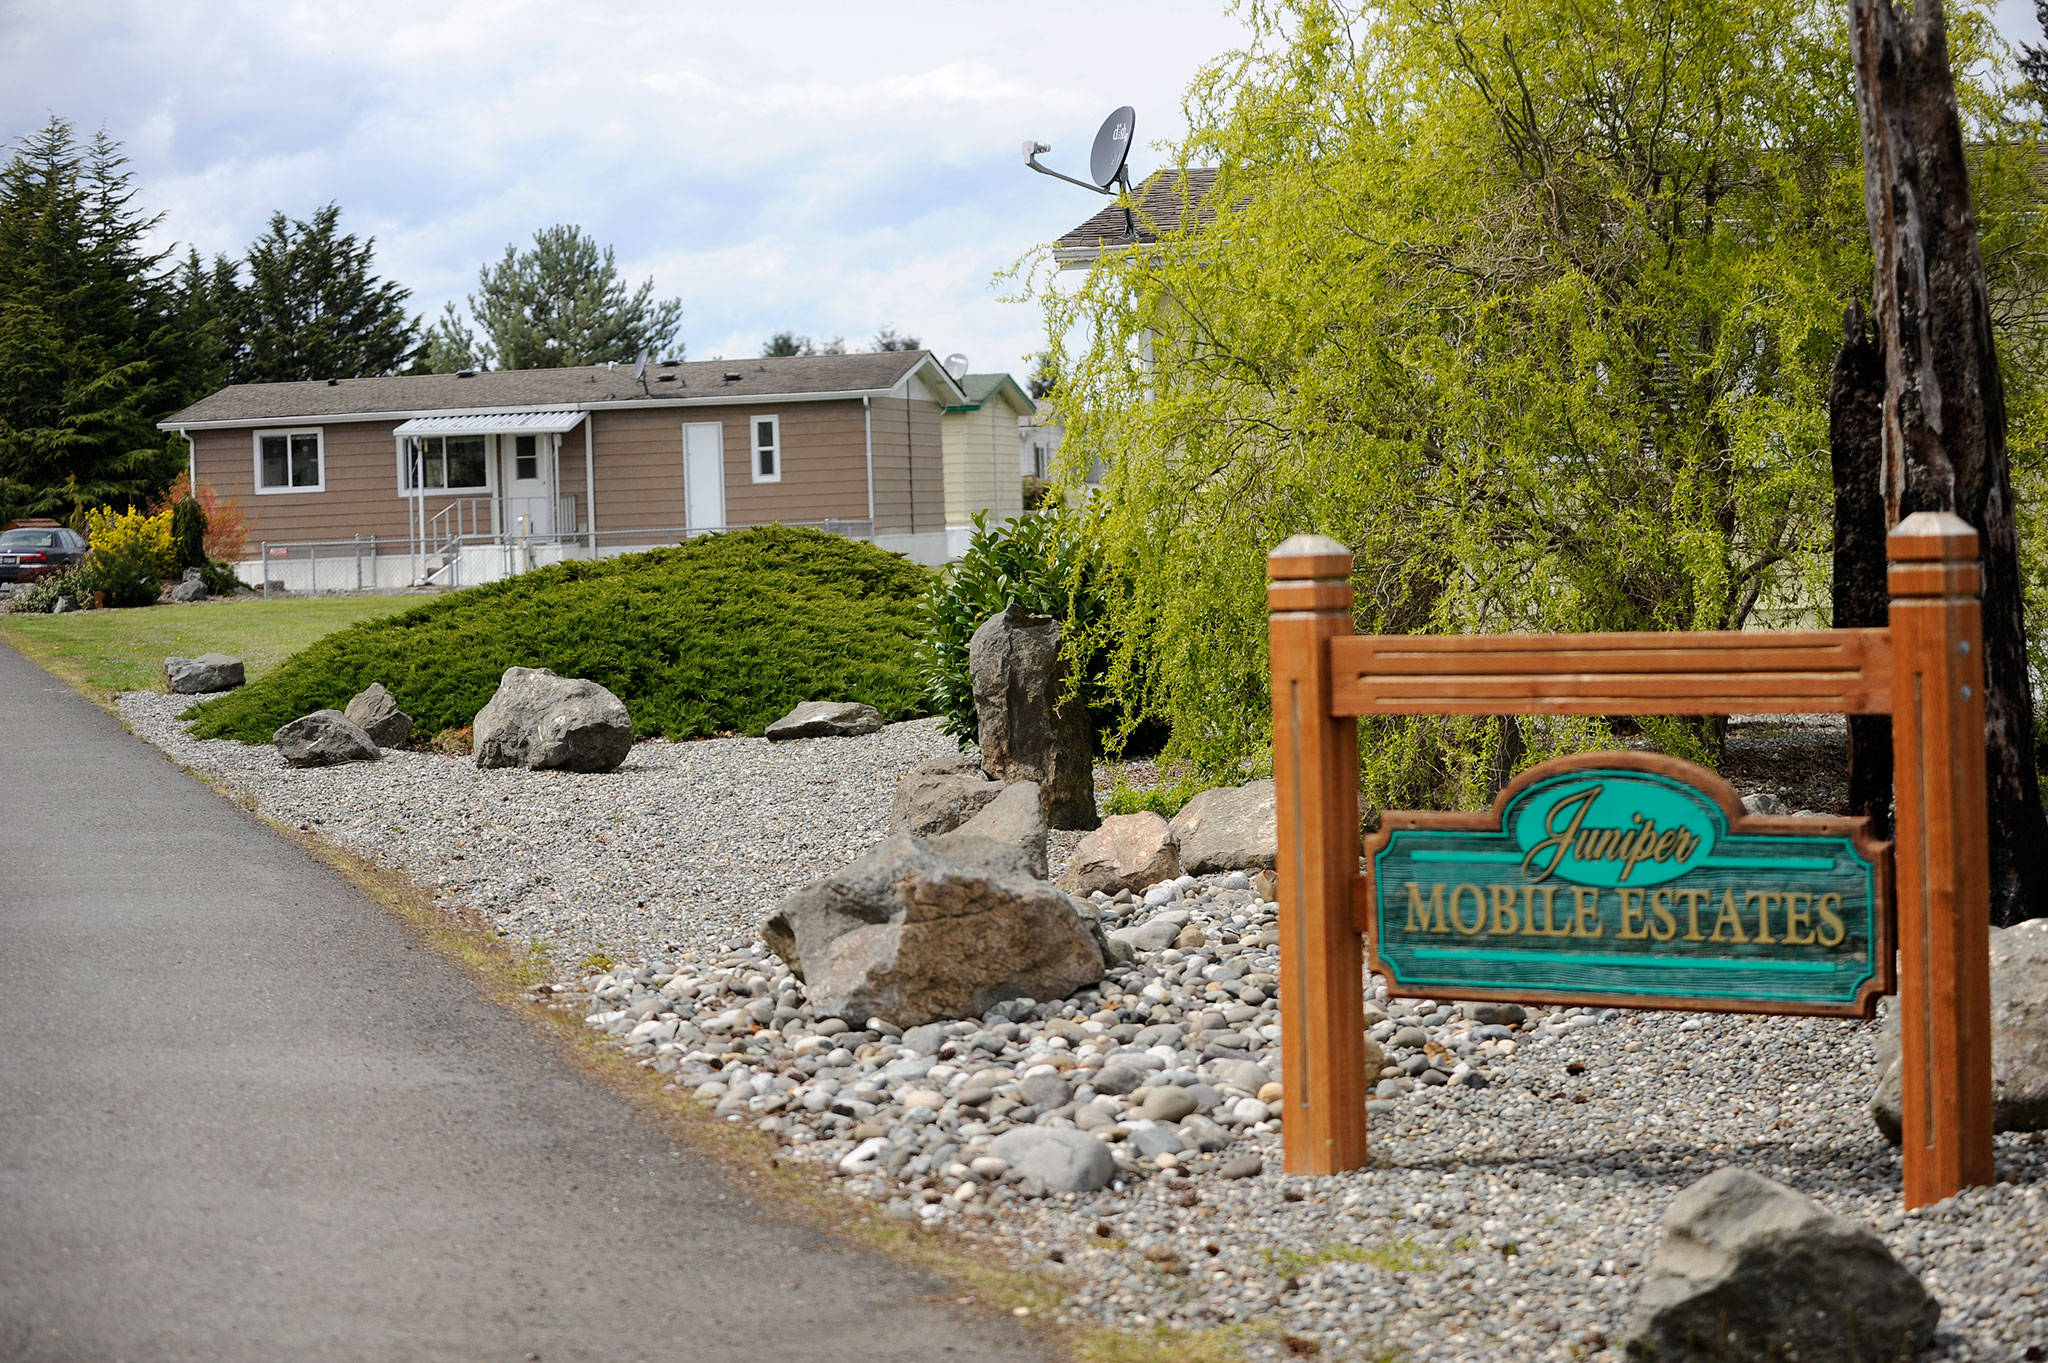 Eleana Maria Christianson, 49, of Sequim was sentenced to 45 days in jail on Tuesday, April 18, for stealing upwards of $775,000 while working for Parks Manager LLC, which manages Juniper Mobile Estates in Sequim. Sequim Gazette photo by Matthew Nash